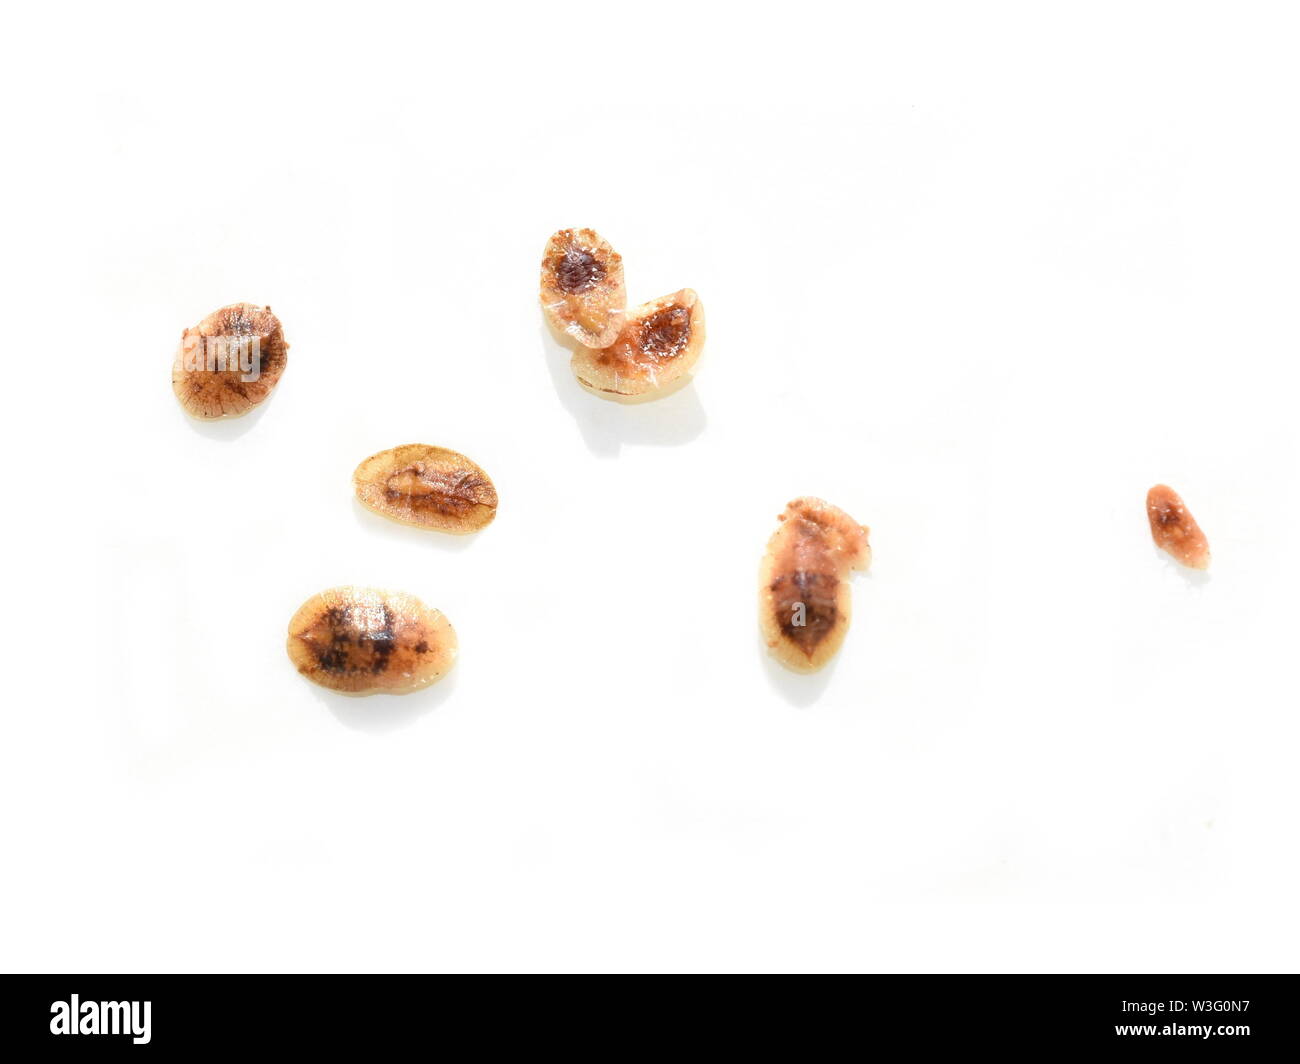 Brown scale insects coccoidea isolated on white background Stock Photo